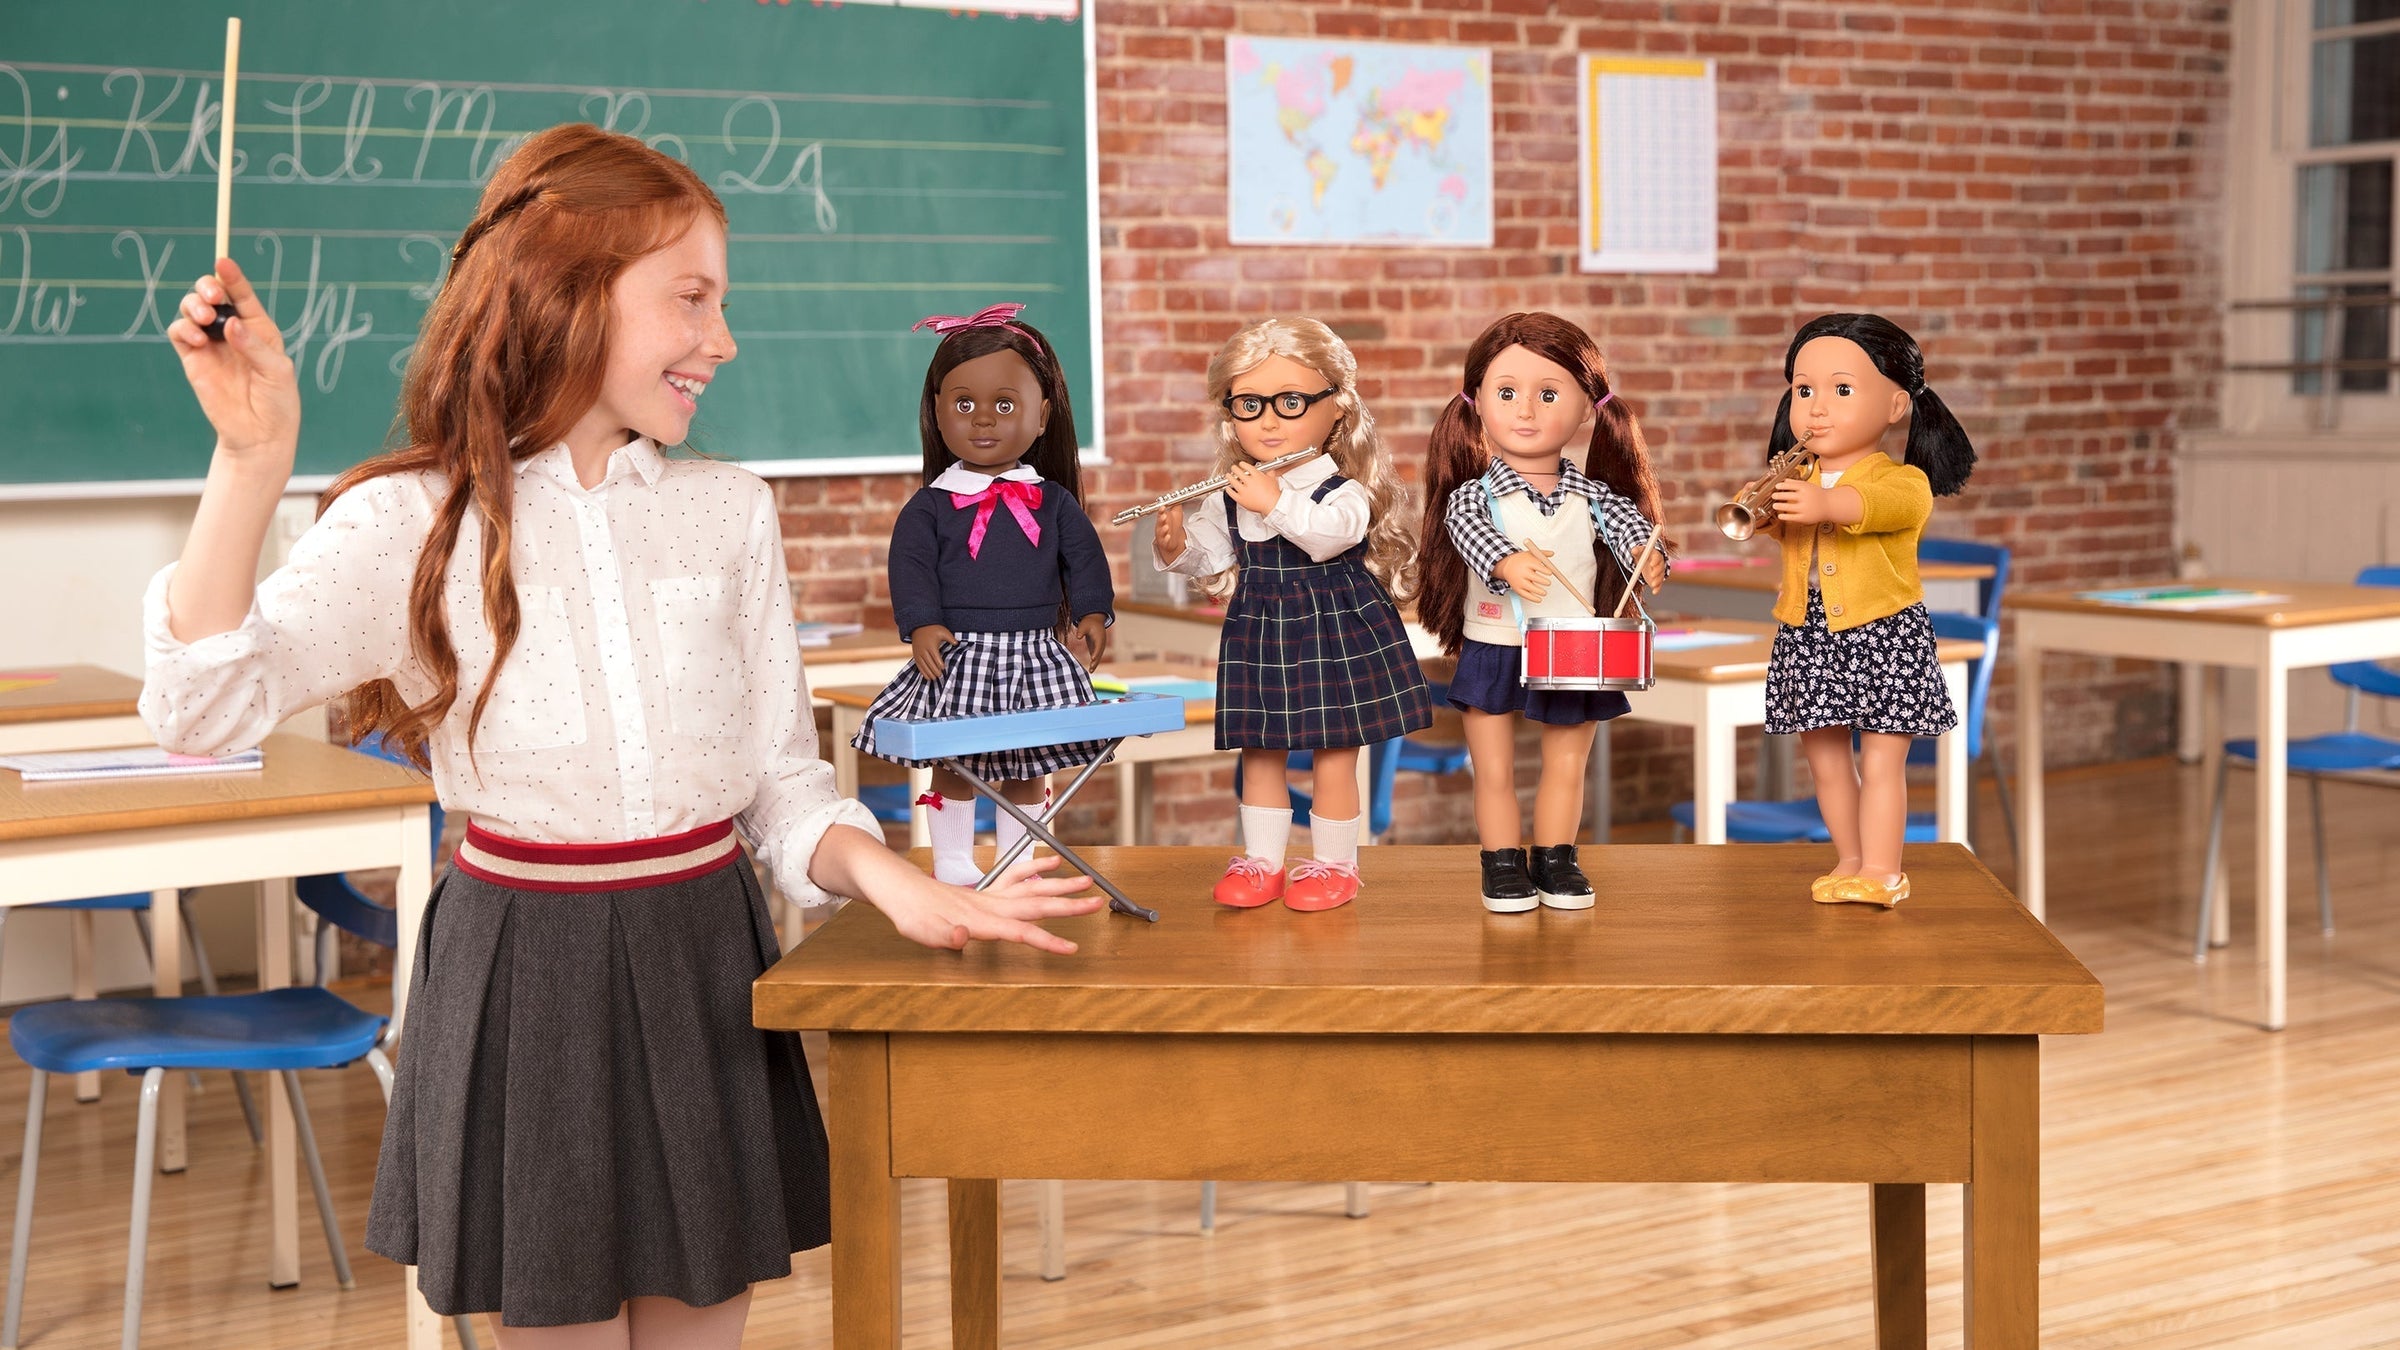 Girl playing with dolls in classroom